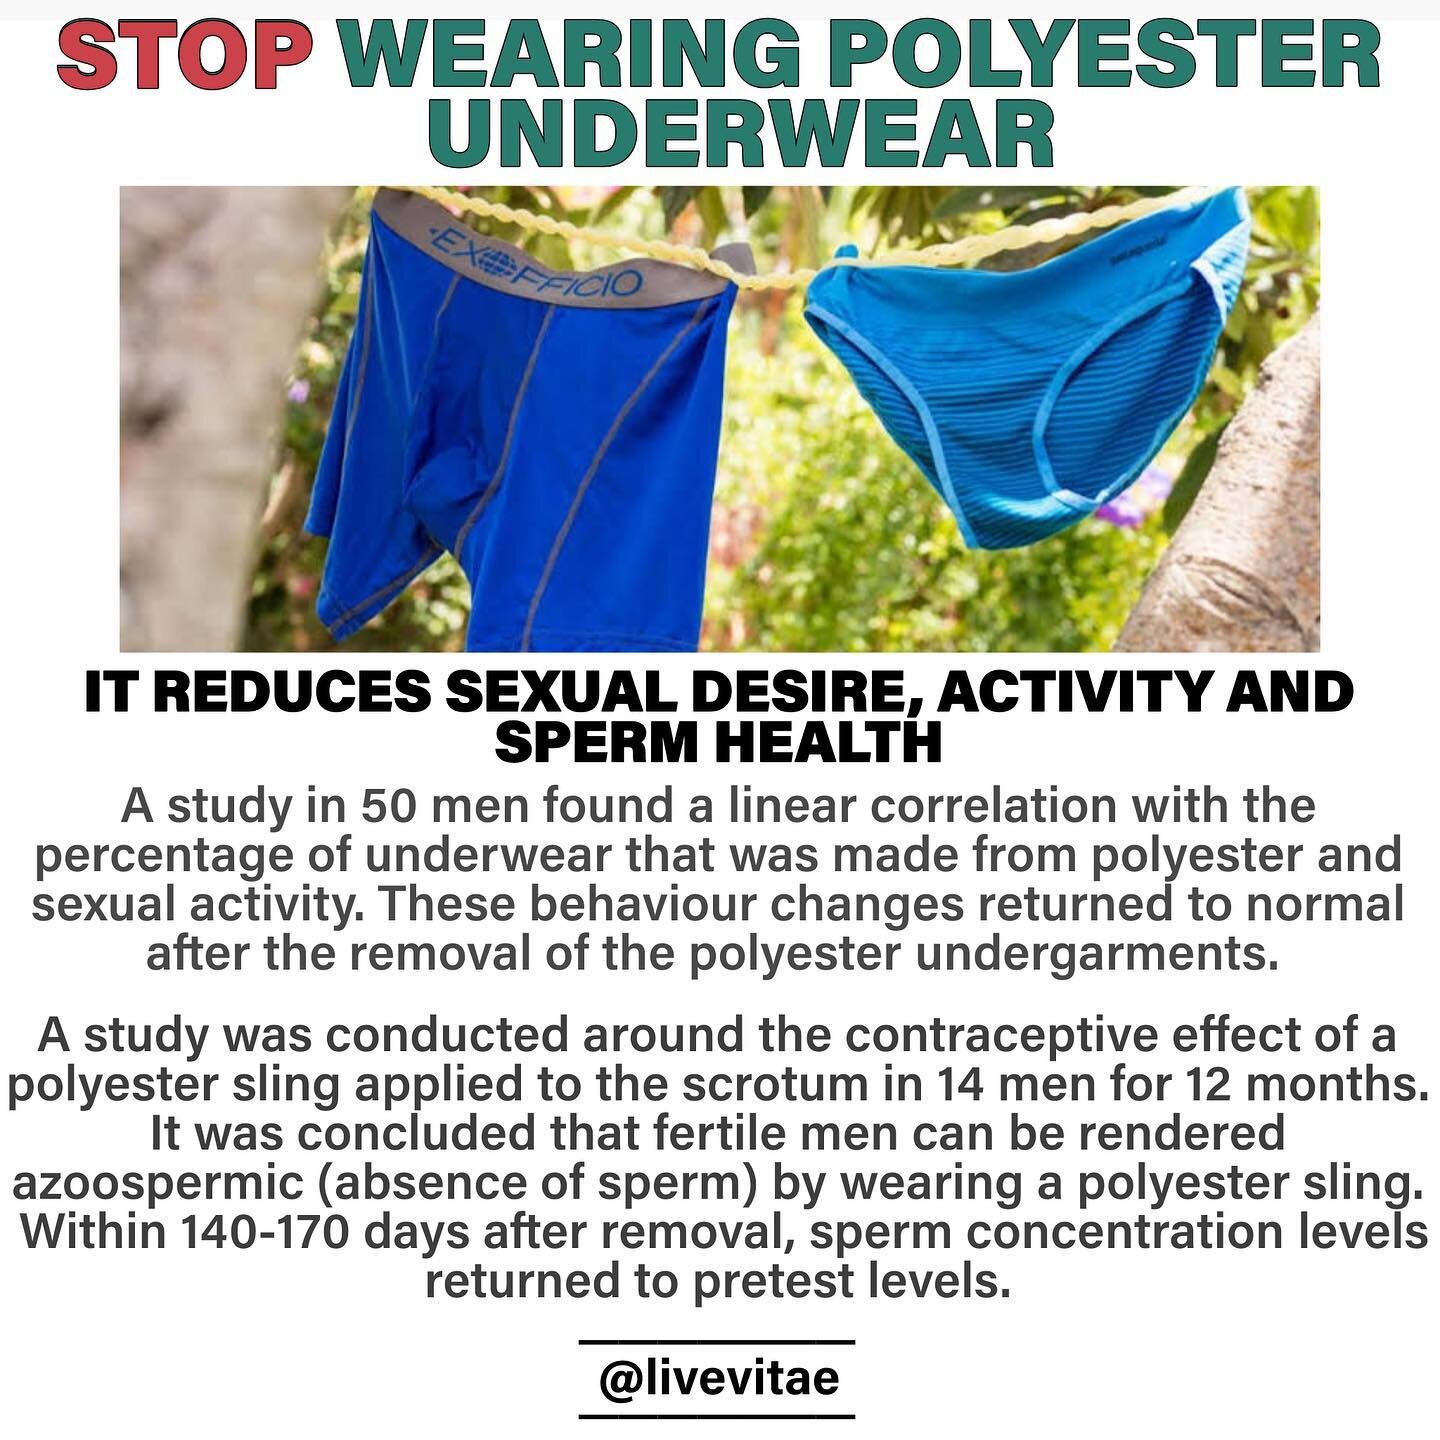 did you know that tightly fitted polyester underwear can be a contraceptive and problematic for your sexual health and behavior 😳

Share this with any man using polyester underwear!

Two studies show this. In addition, several studies demonstrate th